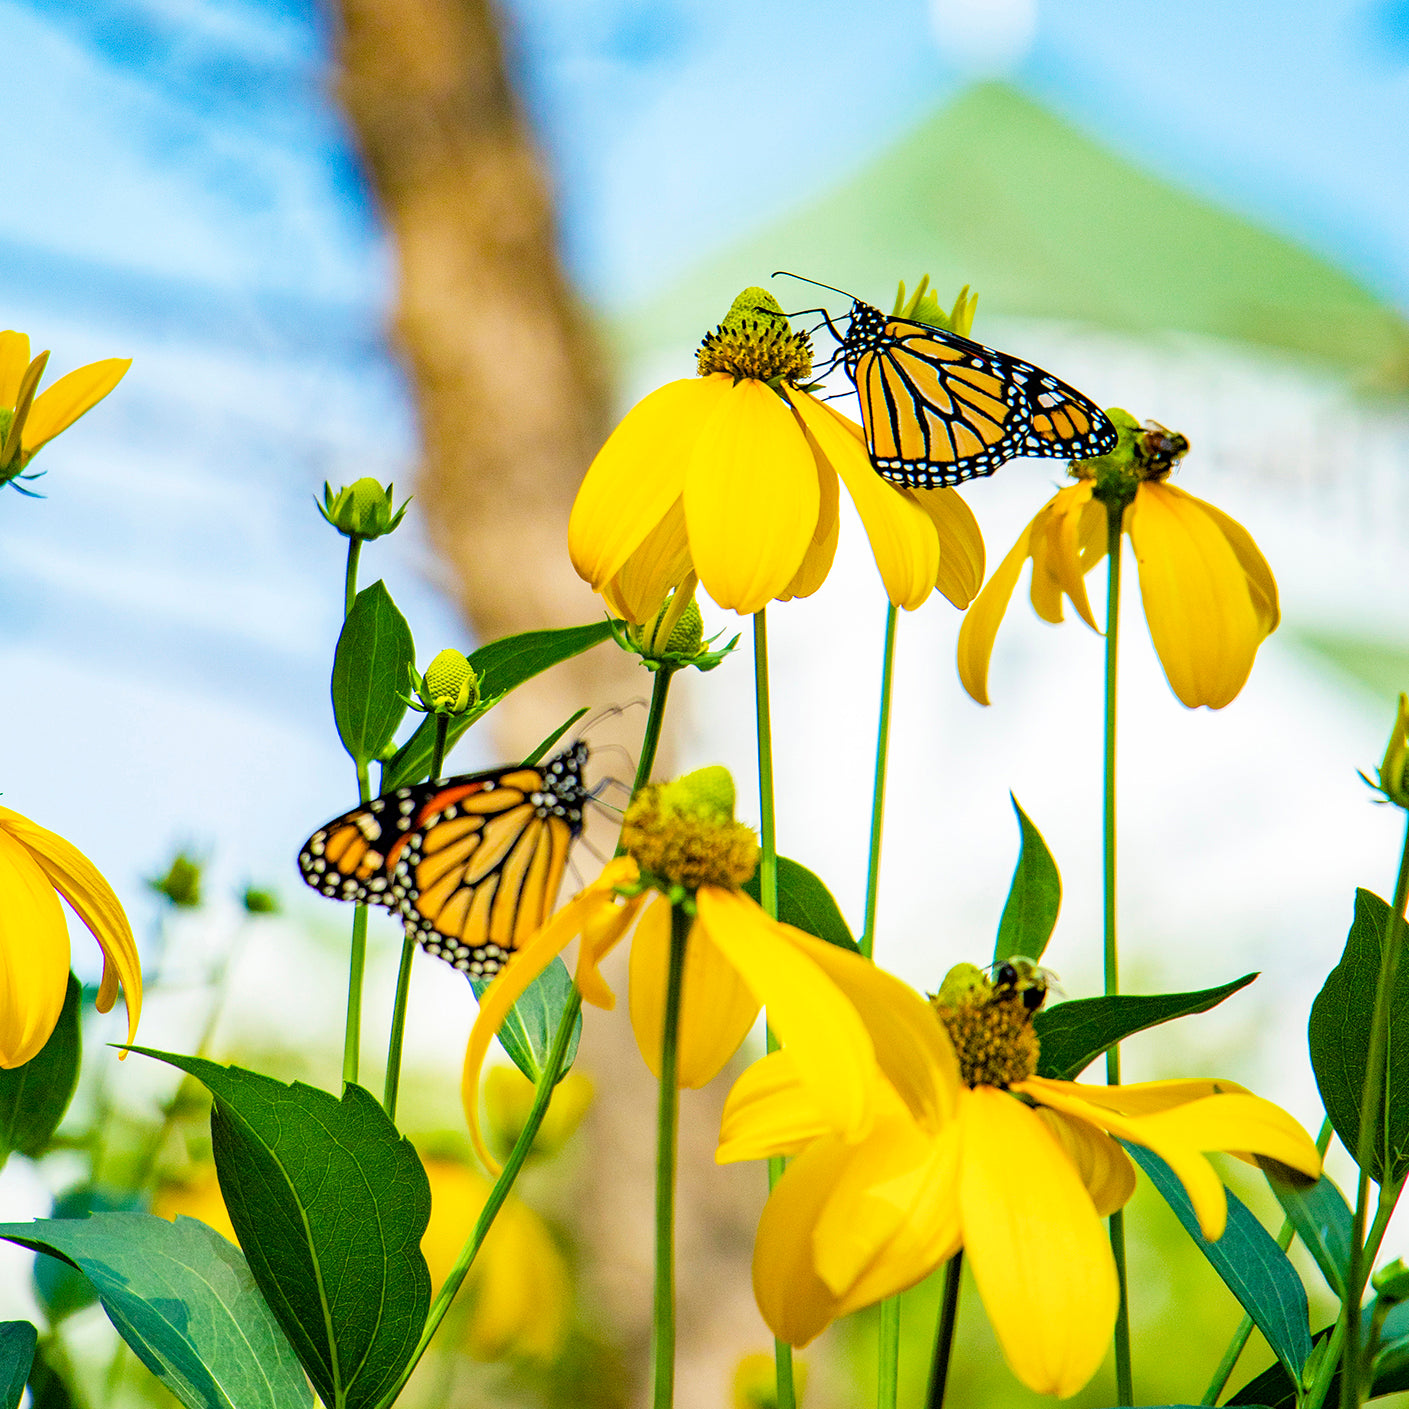 Celebrate the magic of Monarchs with this card featuring a photograph of a butterfly happily sipping nectar from a flower in Grand Hotel's Secret Garden on Mackinac Island.  Open the card to discover more monarchs sharing a feast with fellow pollinators.  